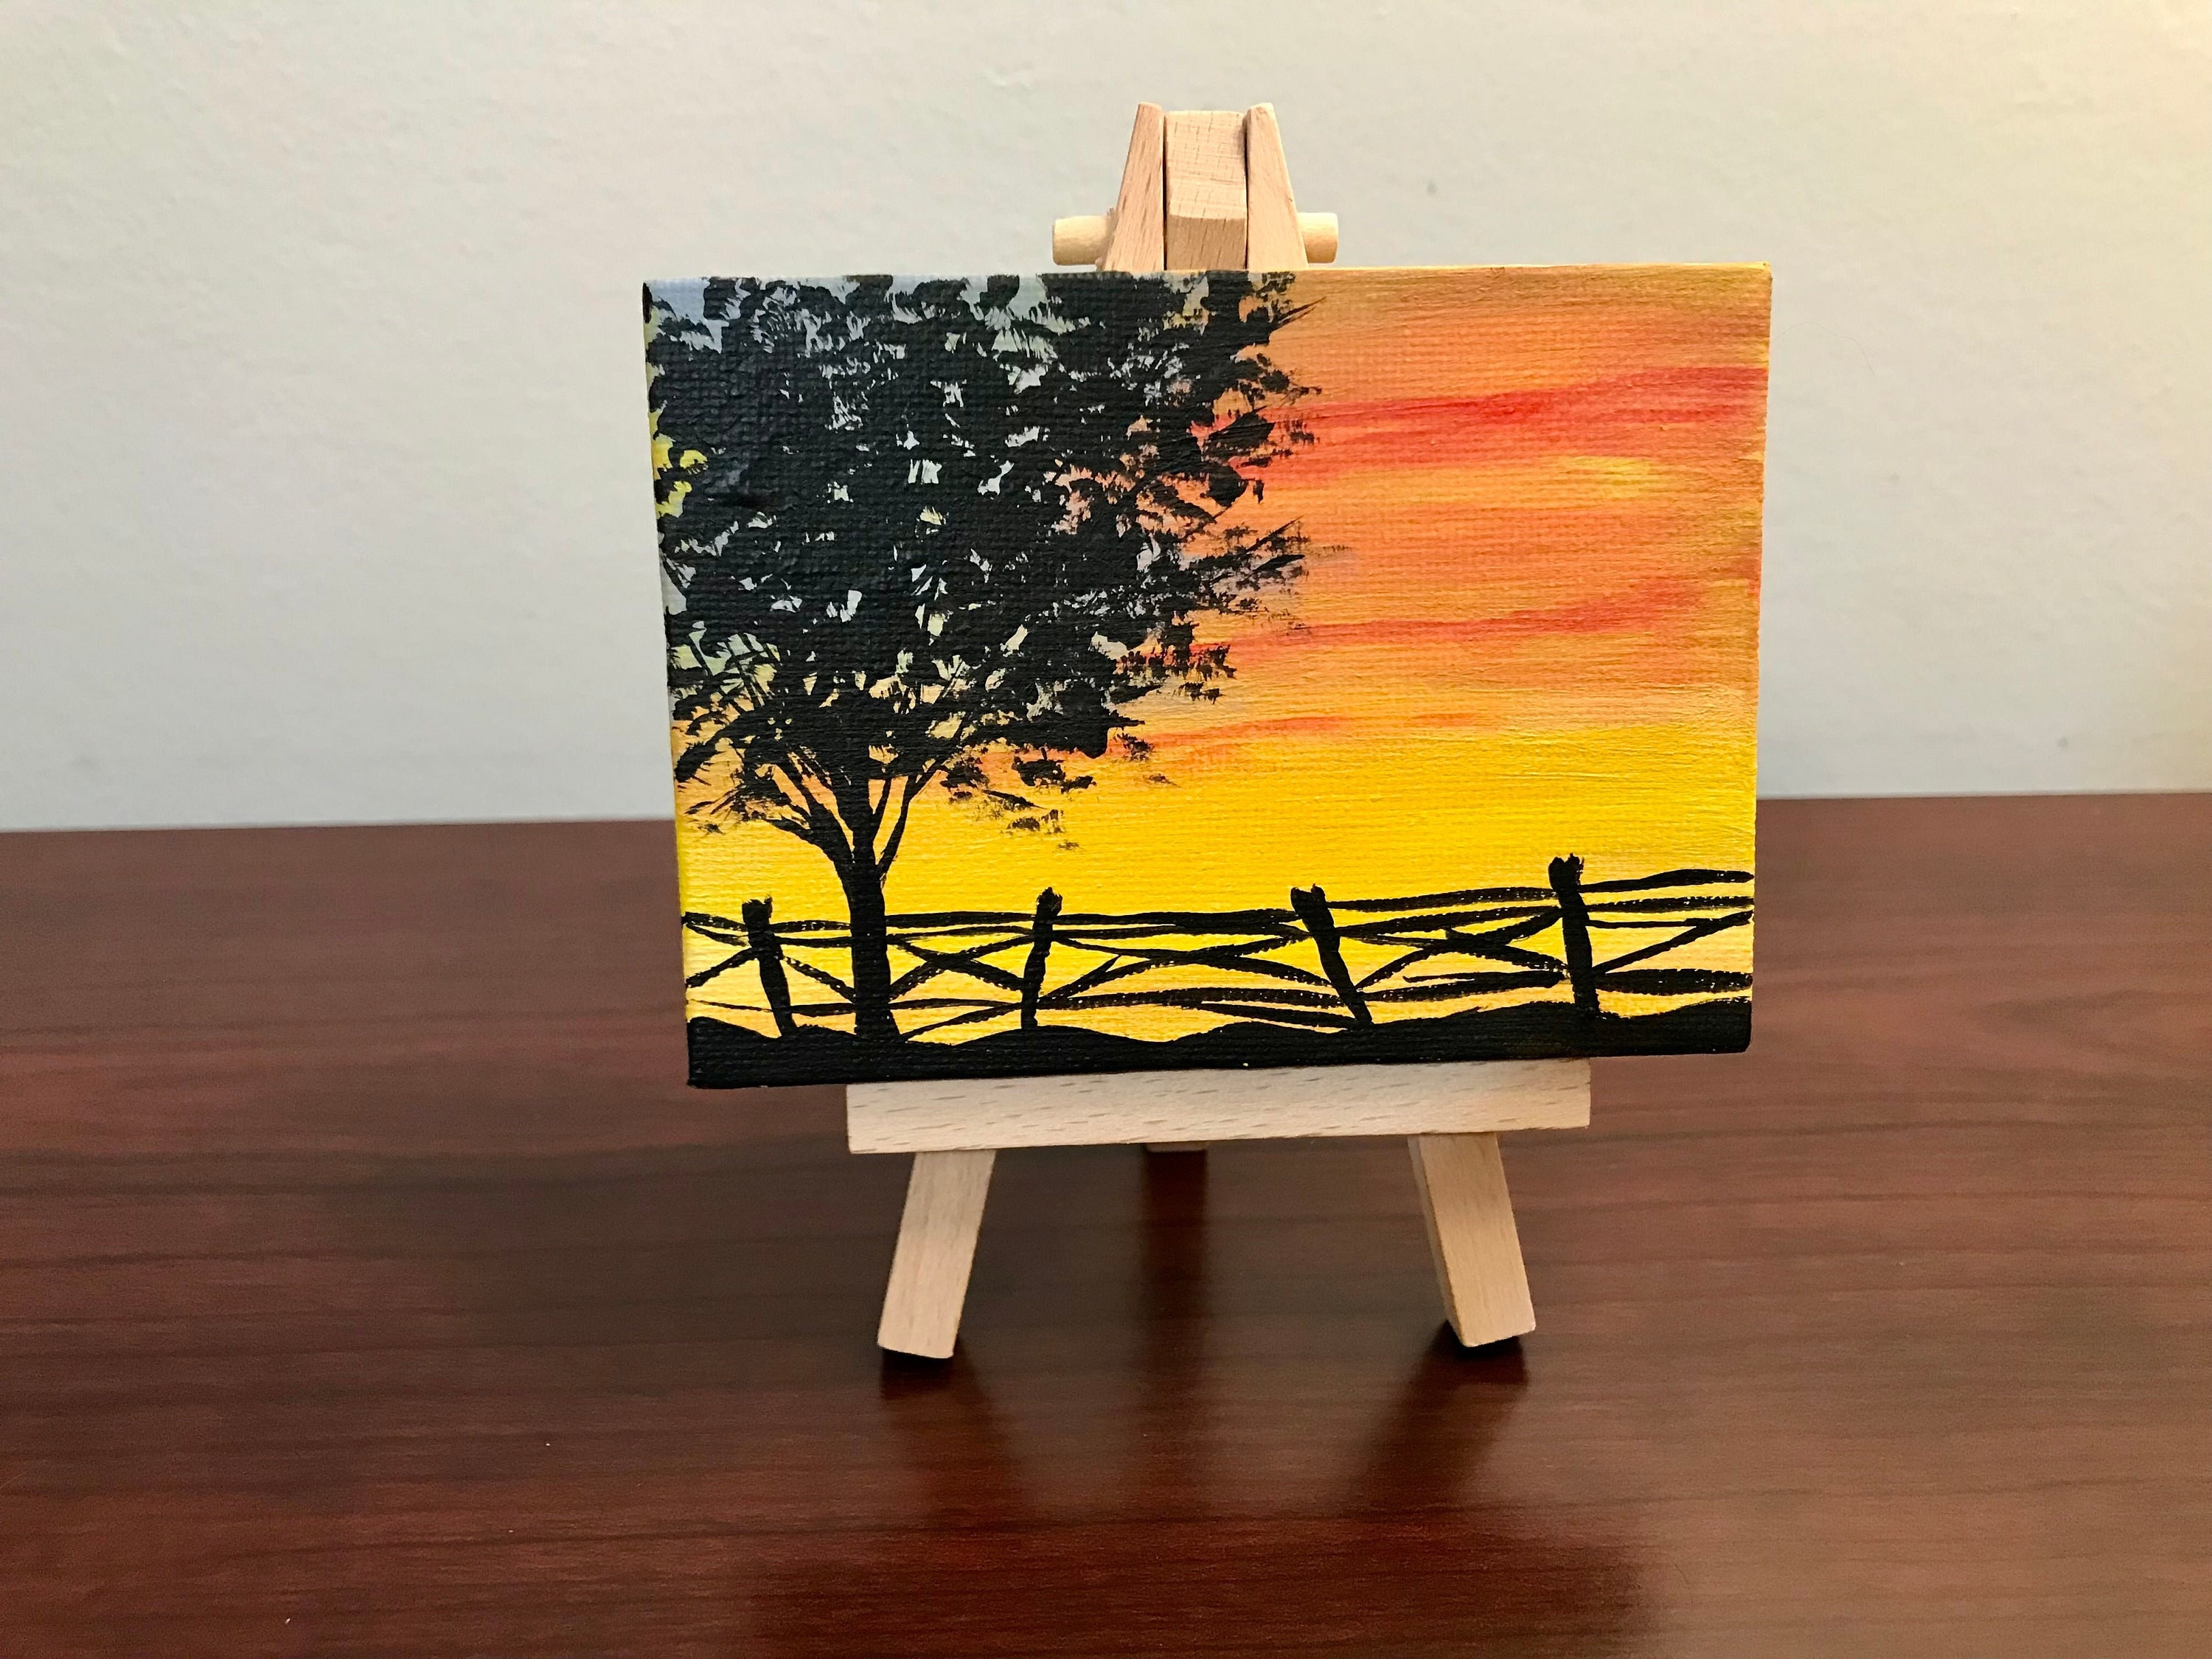 Miniature Painting, Mini Canvas, Sunset, Set of 2 Paintings, Landscape,  3X4, Decor, Canvas Art, Painting With Easel 